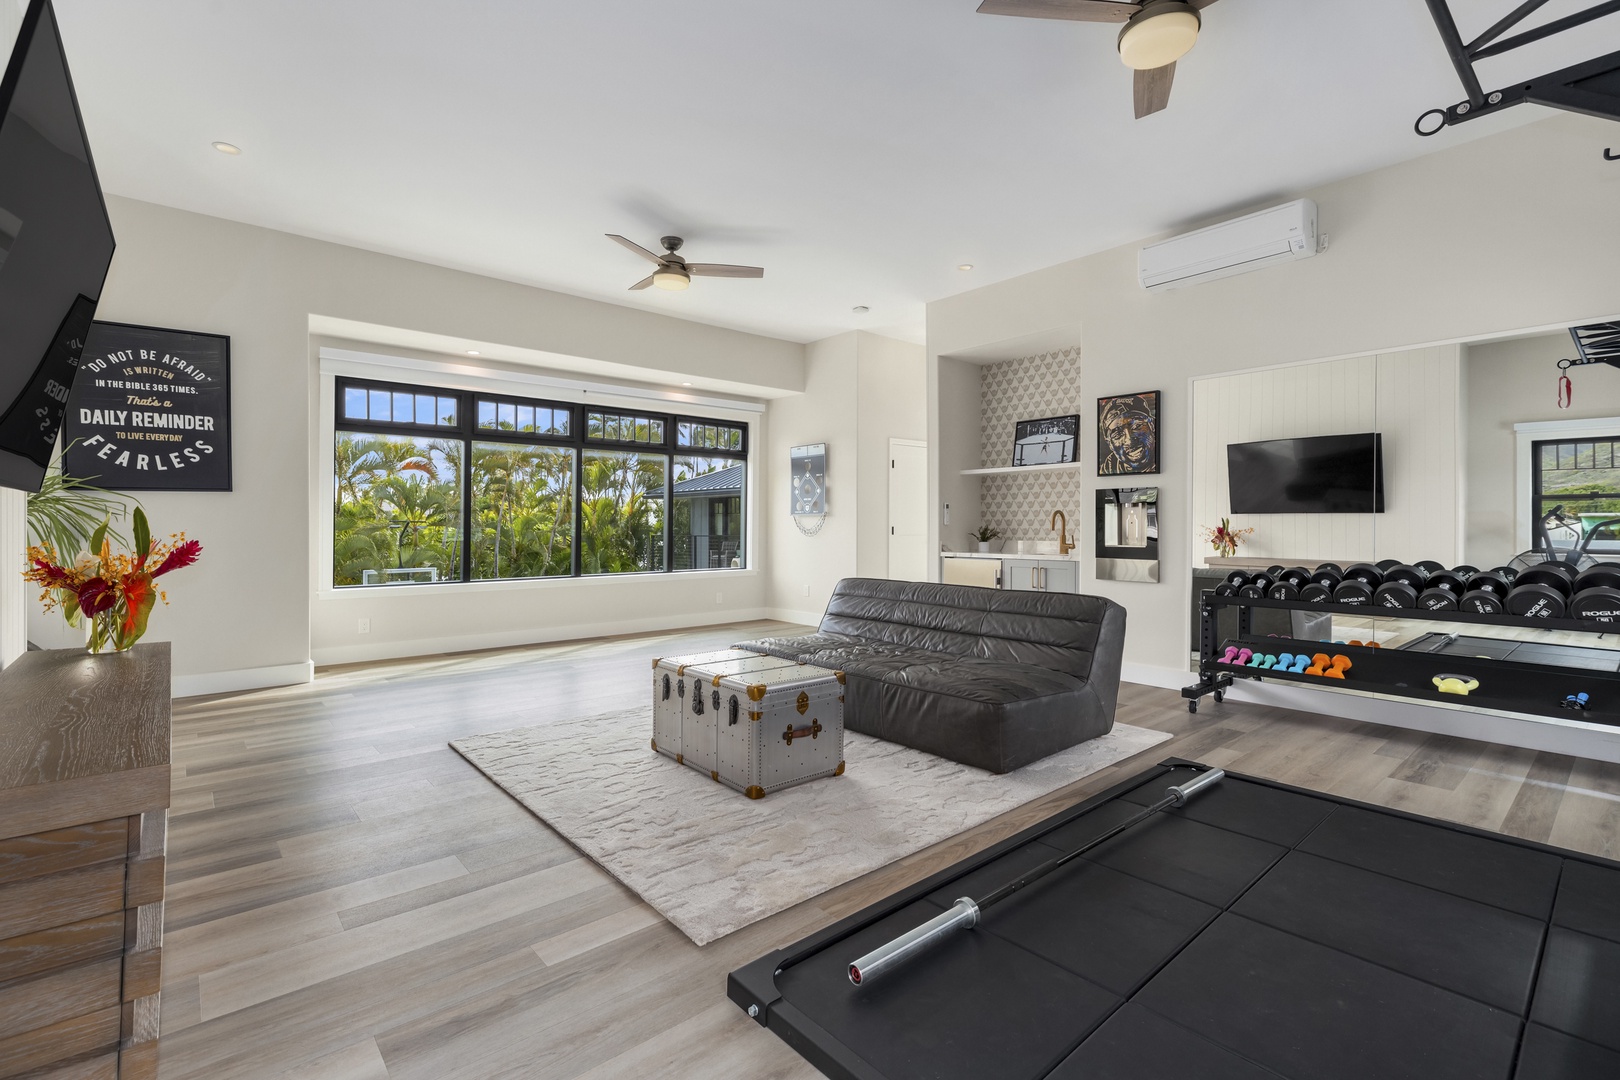 Honolulu Vacation Rentals, Niu Beach Estate - Family room for movie time!